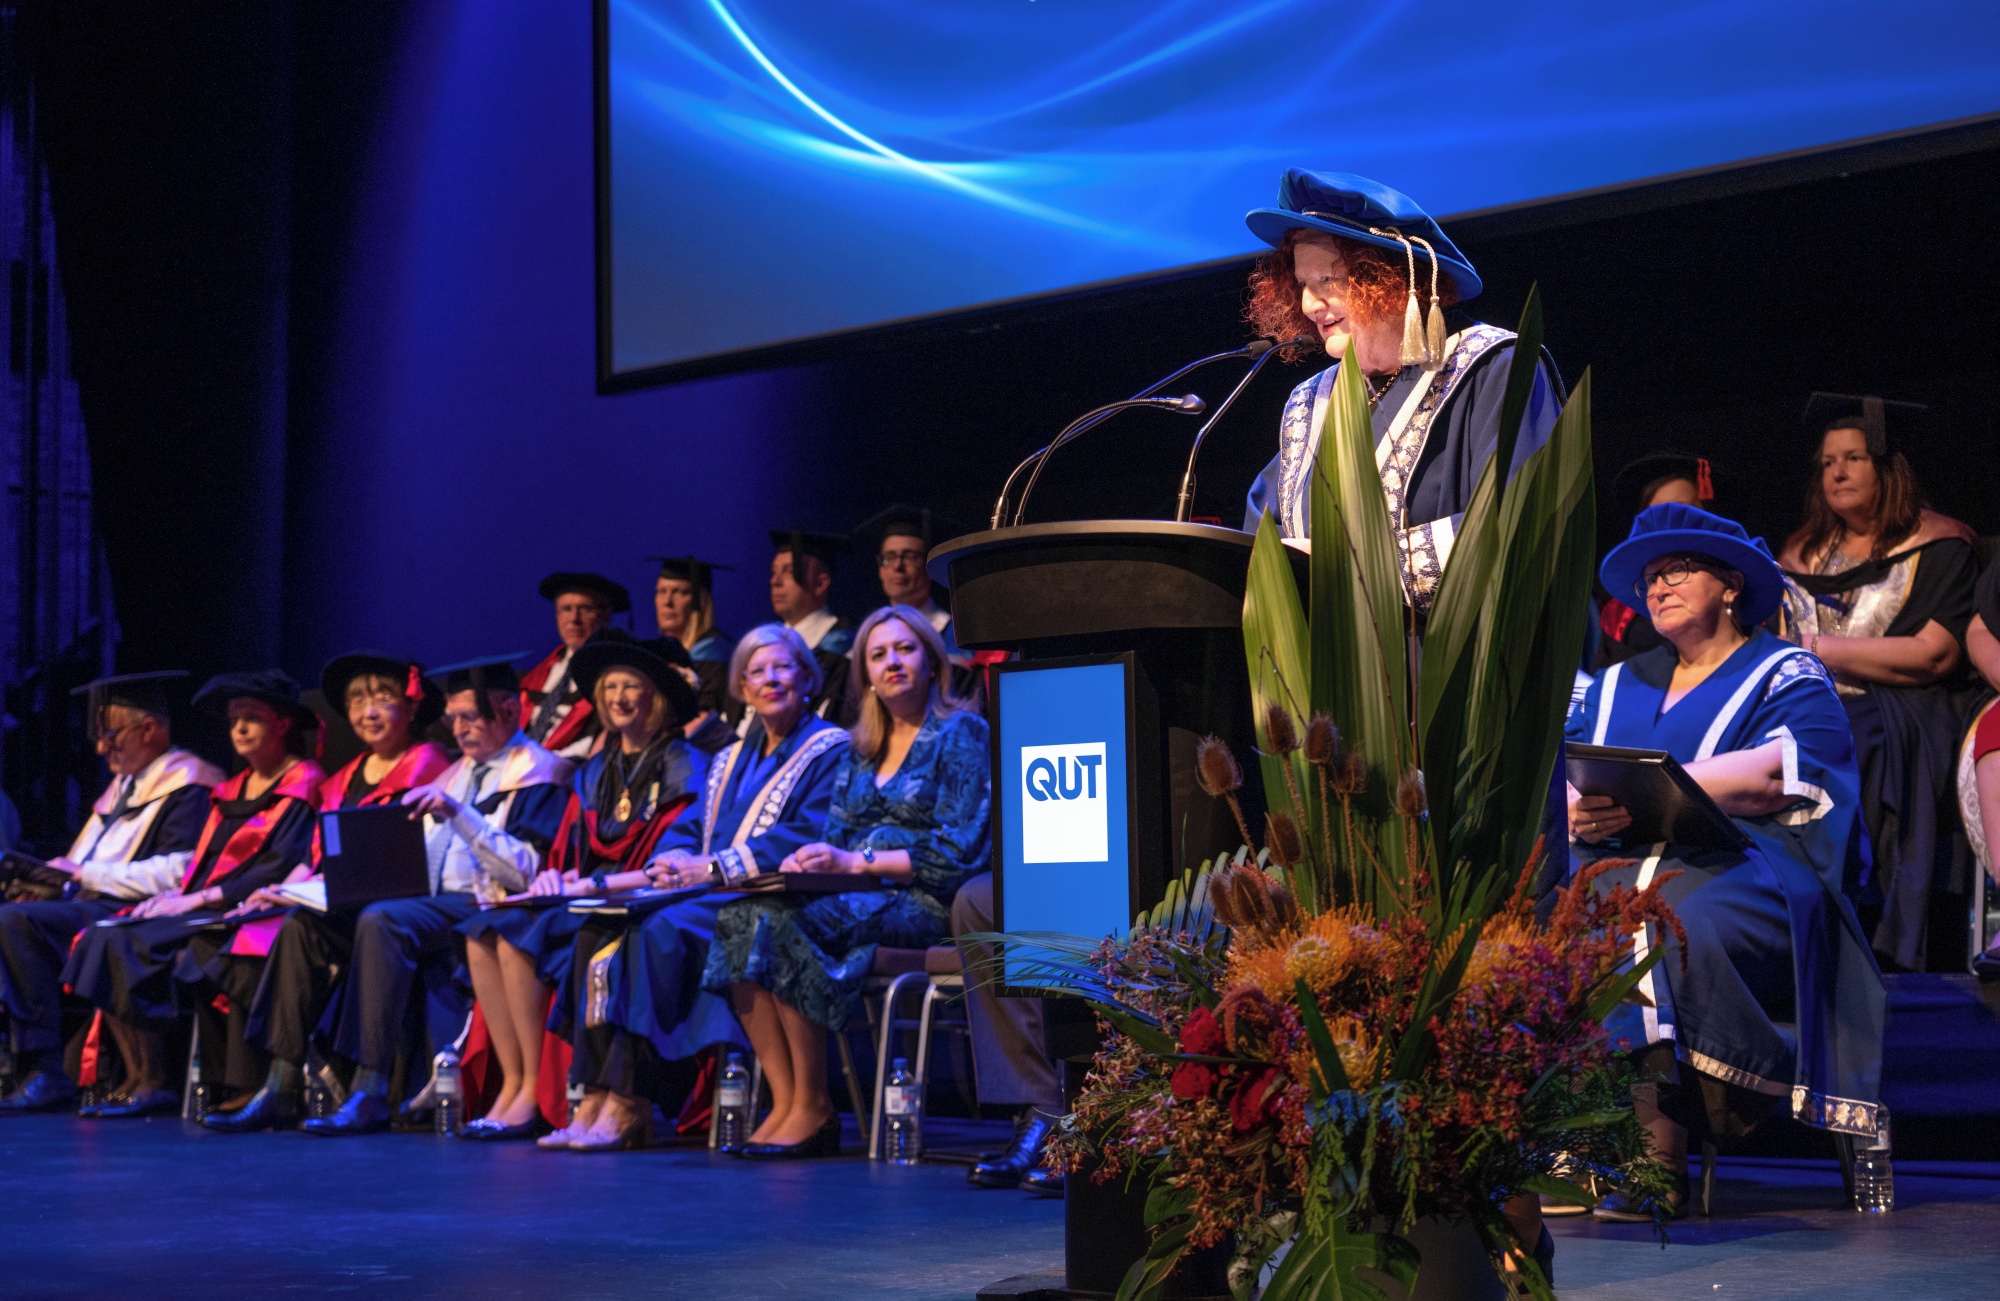 Woman in academic robes addresses audience